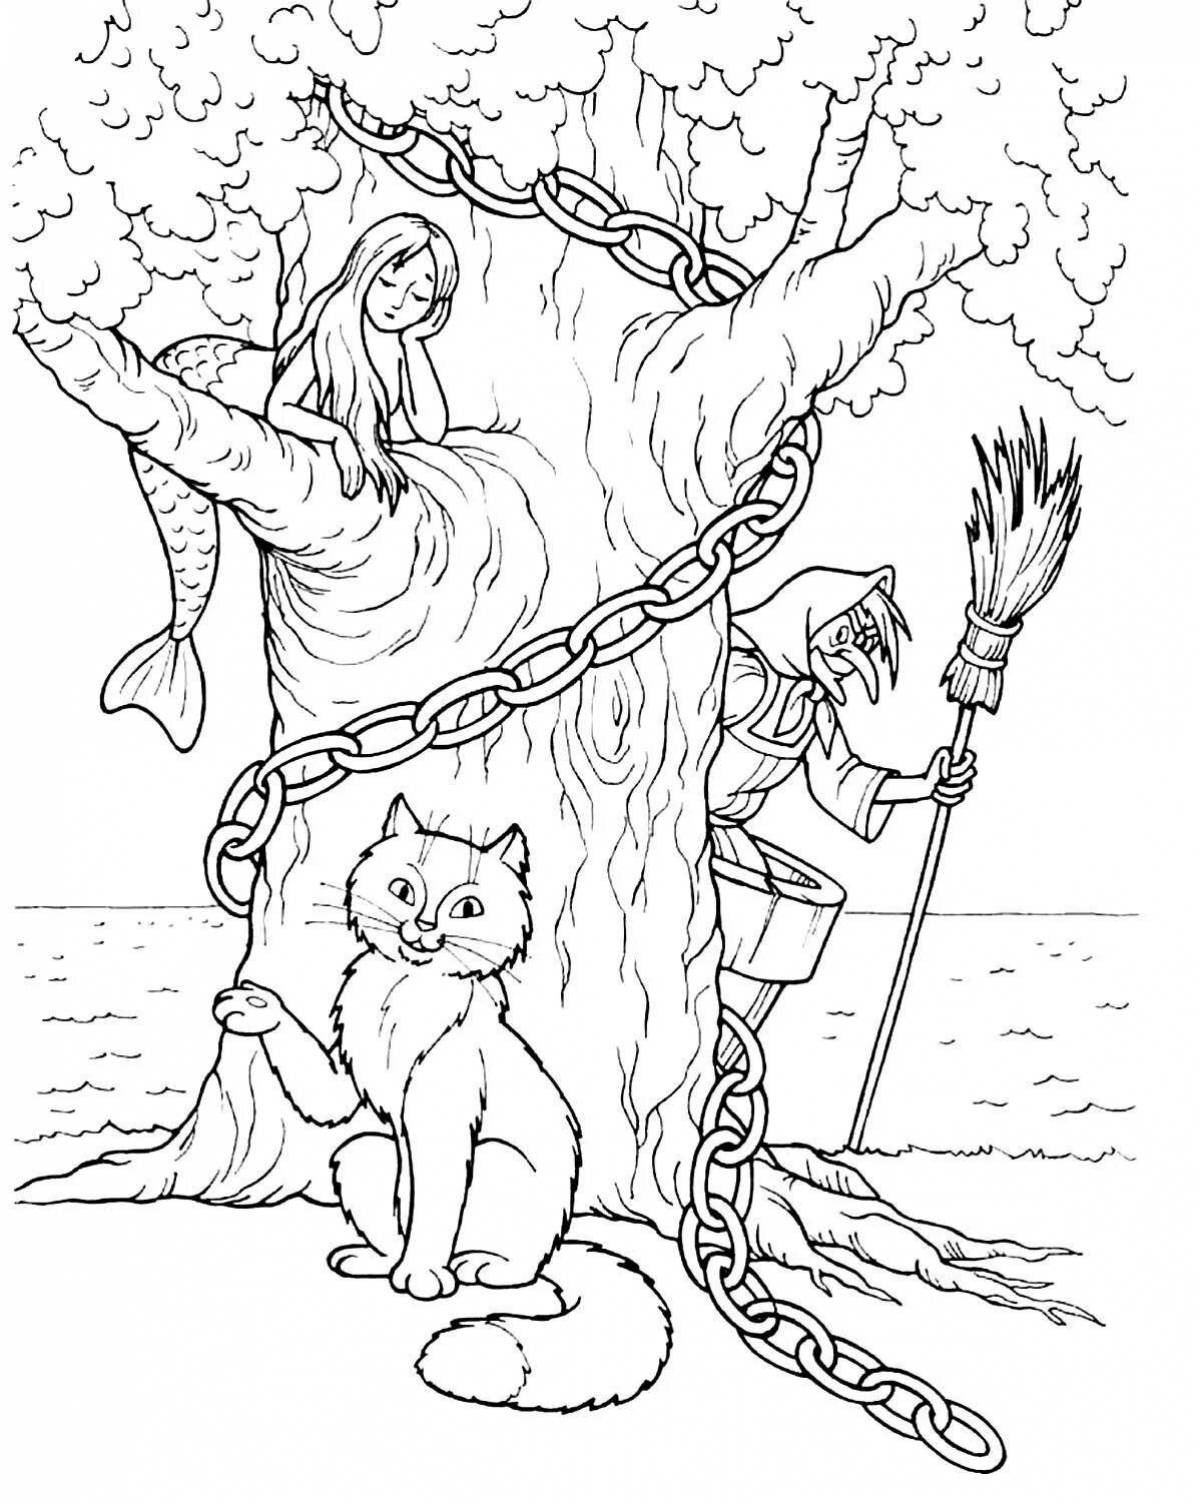 Coloring book bewitching Pushkin's fairy tale